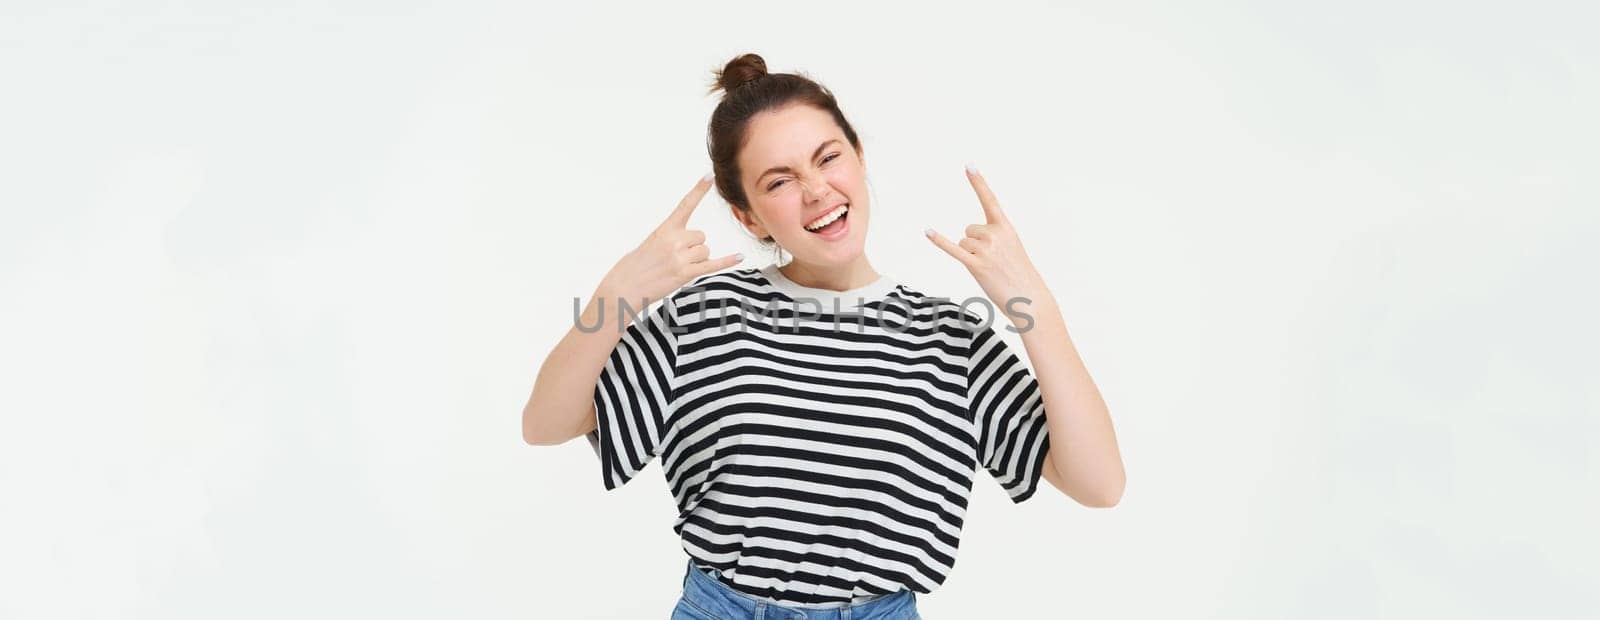 Portrait of excited young woman having fun, rock n roll gesture, enjoys concert, posing upbeat, standing over white background.